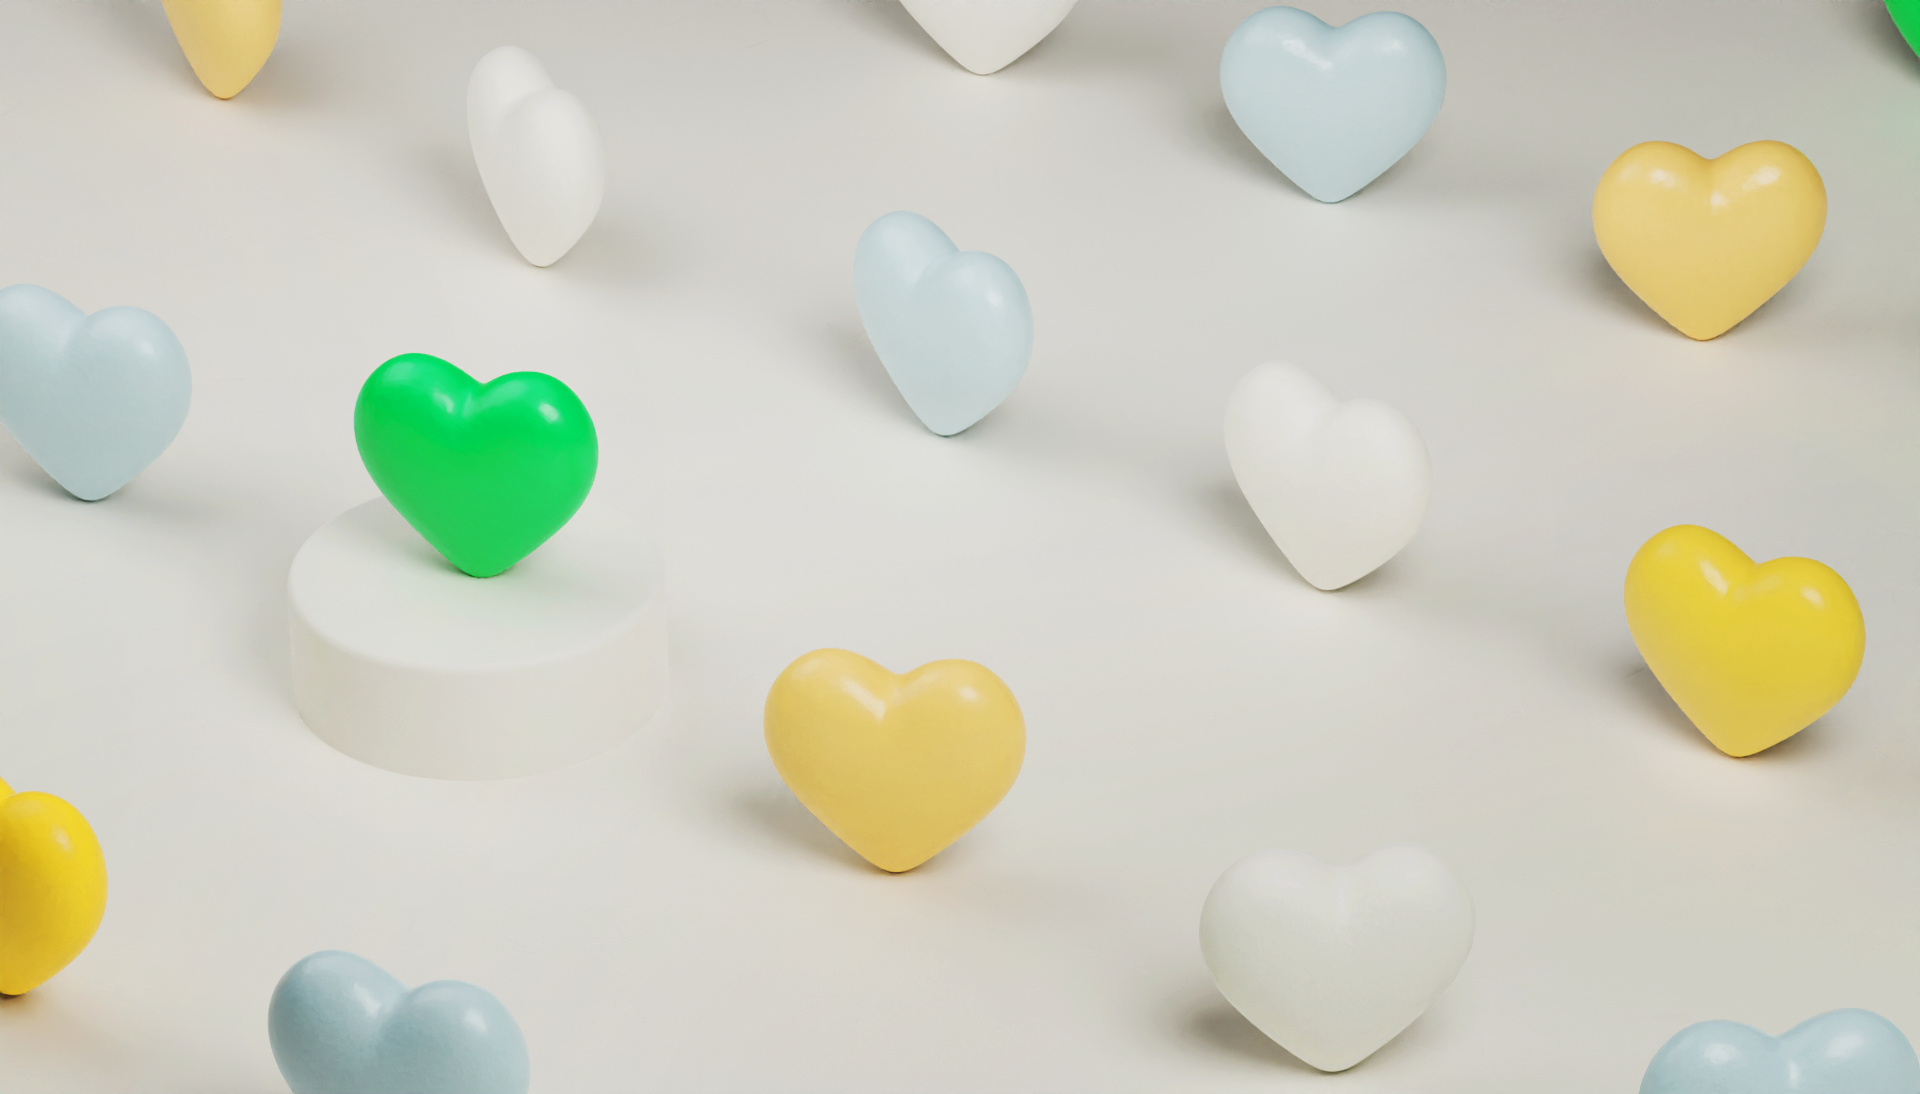 image of hearts symbolizing human-focused content